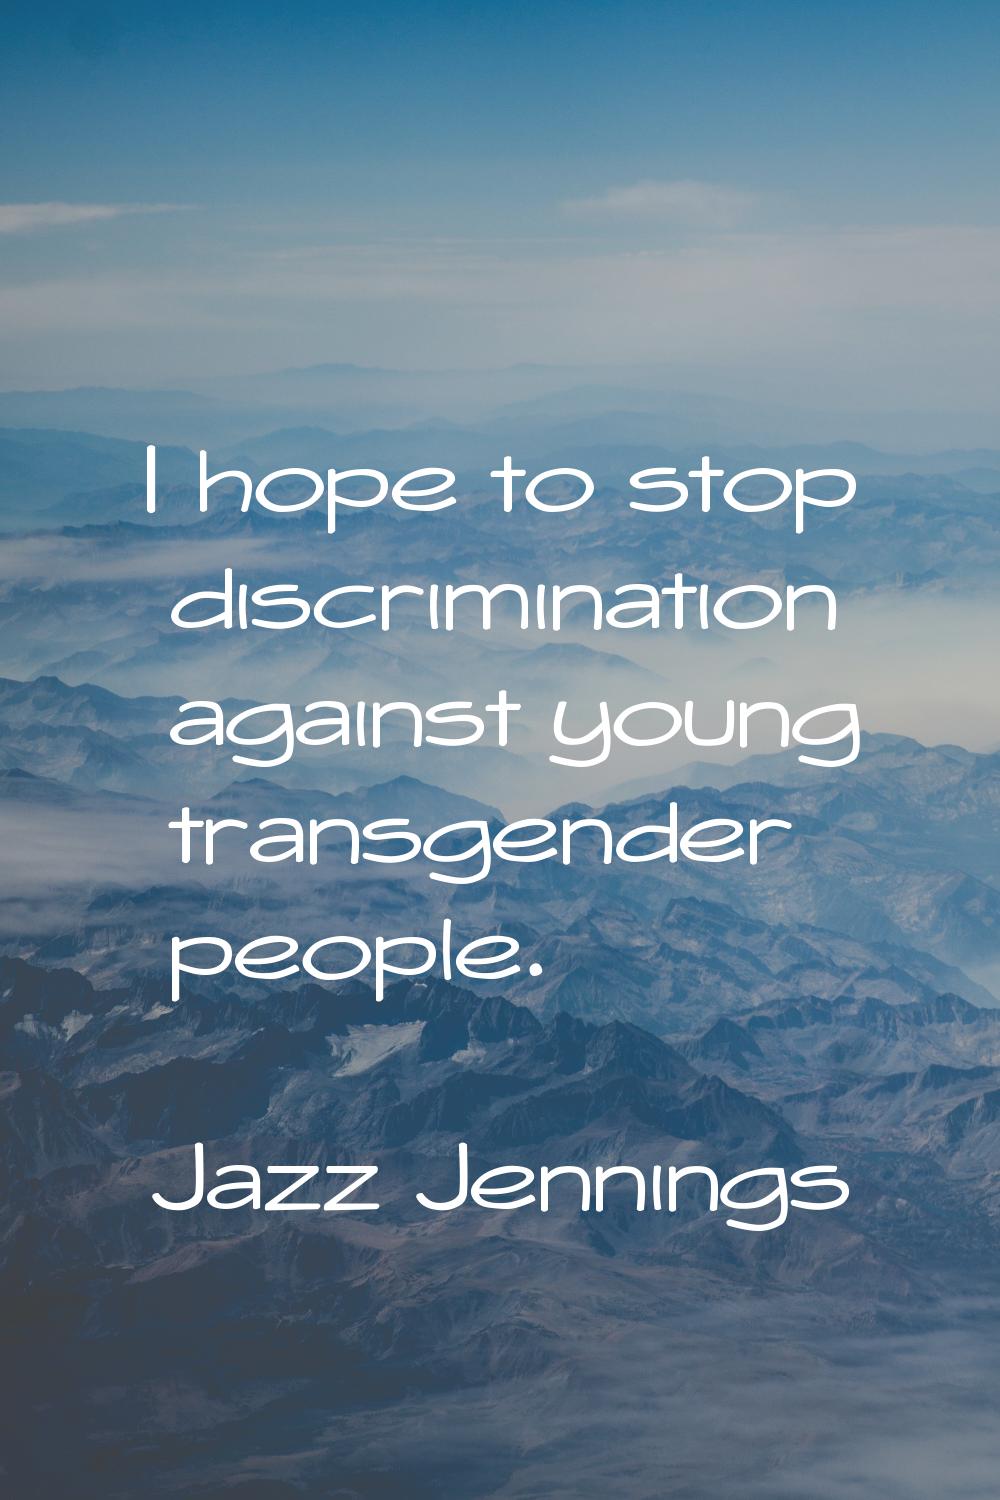 I hope to stop discrimination against young transgender people.